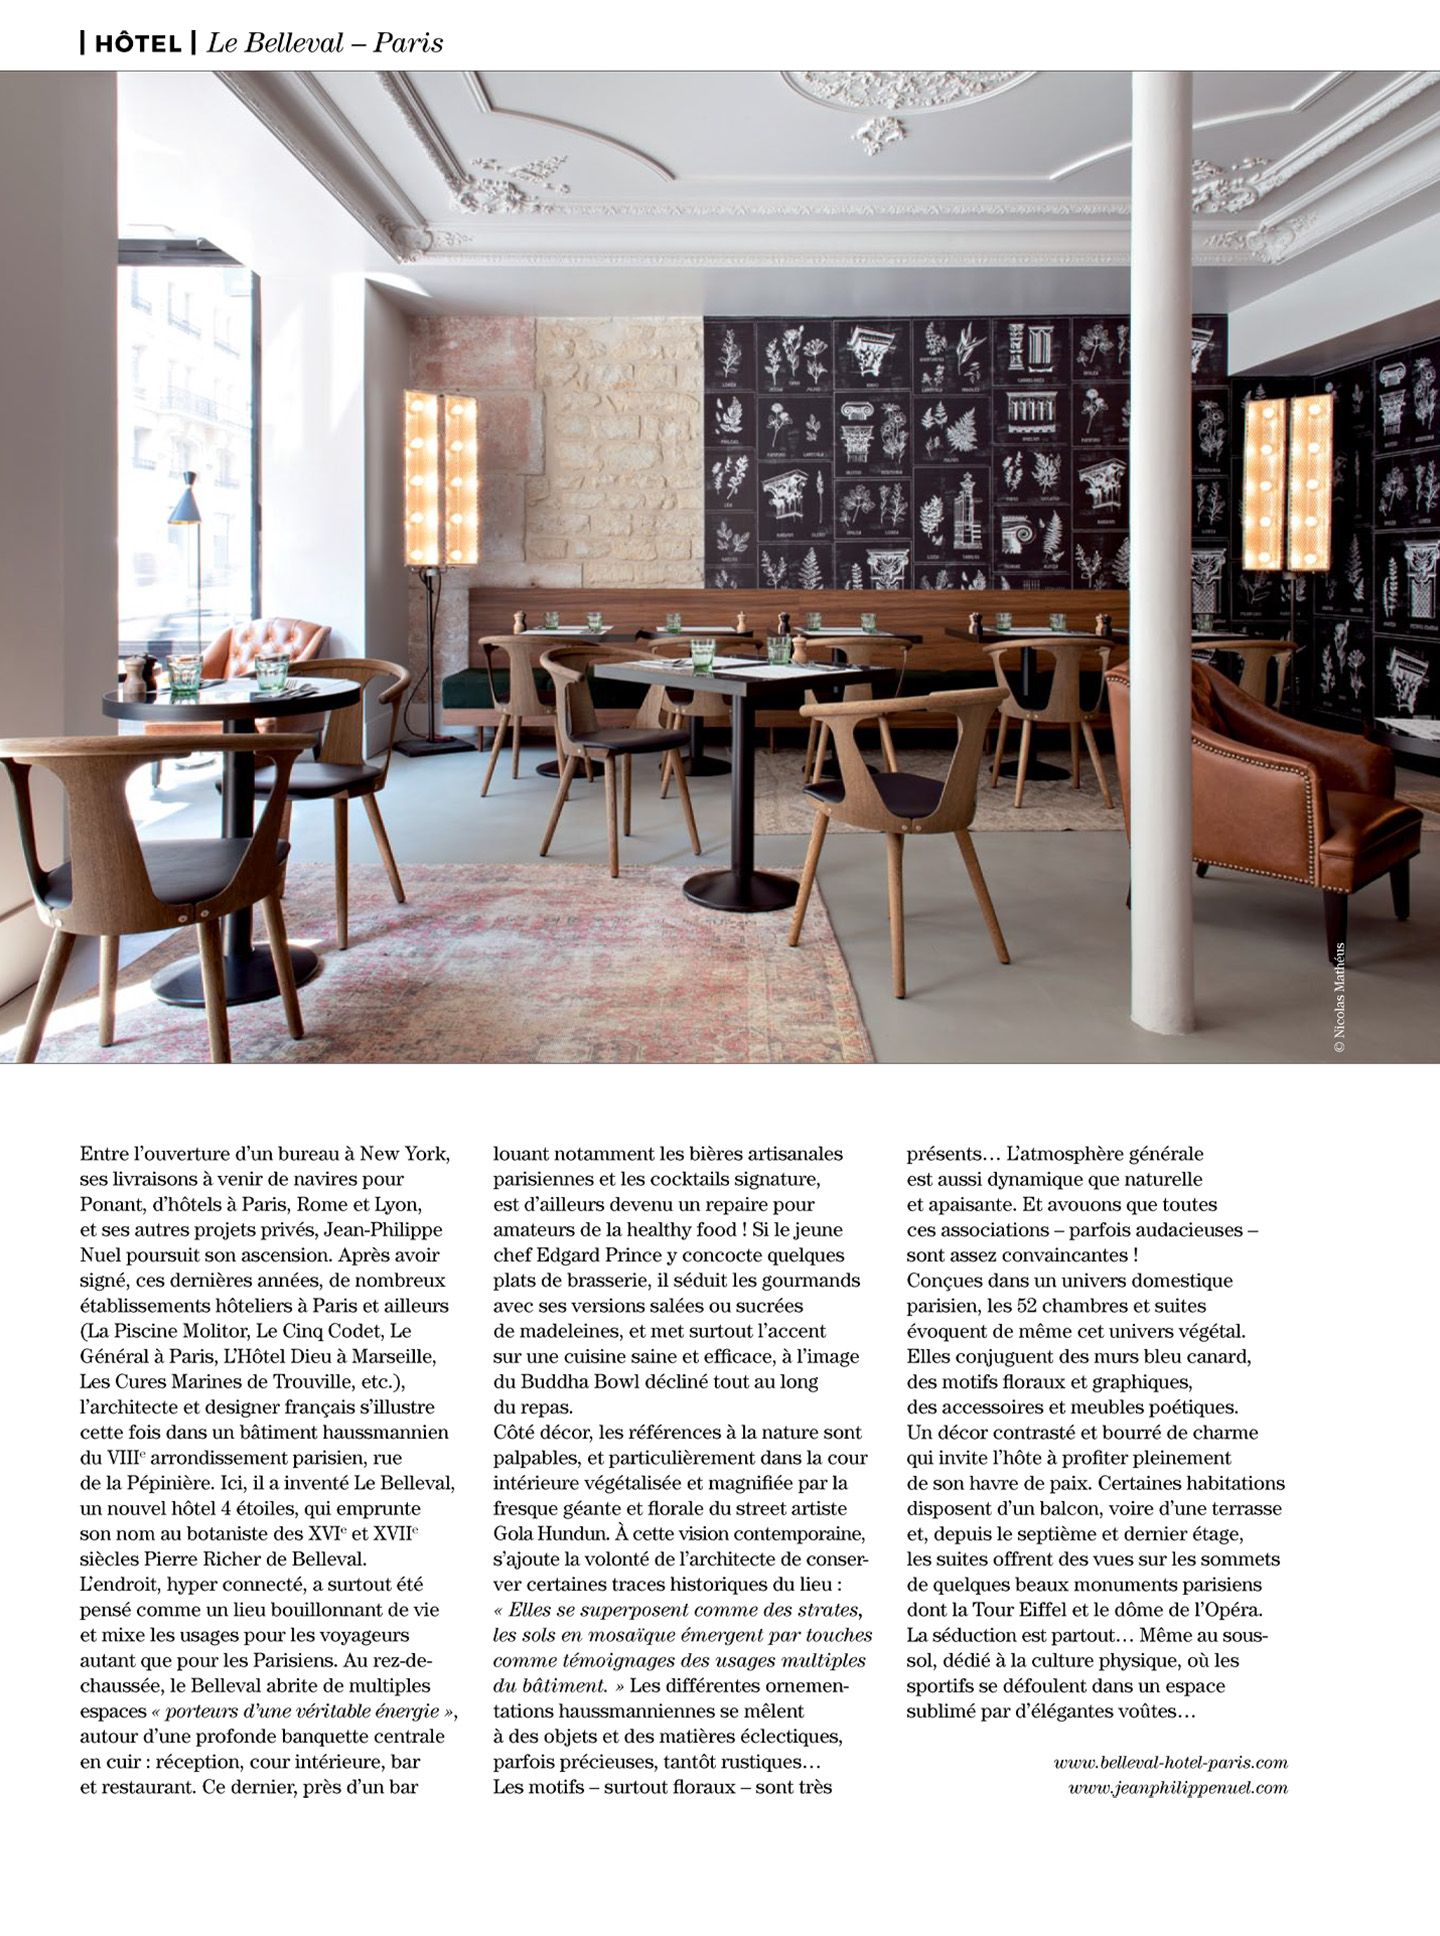 article on the belleval paris by the interior design studio jean-philippe nuel in artravel magazine, lifestyle hotel with a botanical and floral decoration